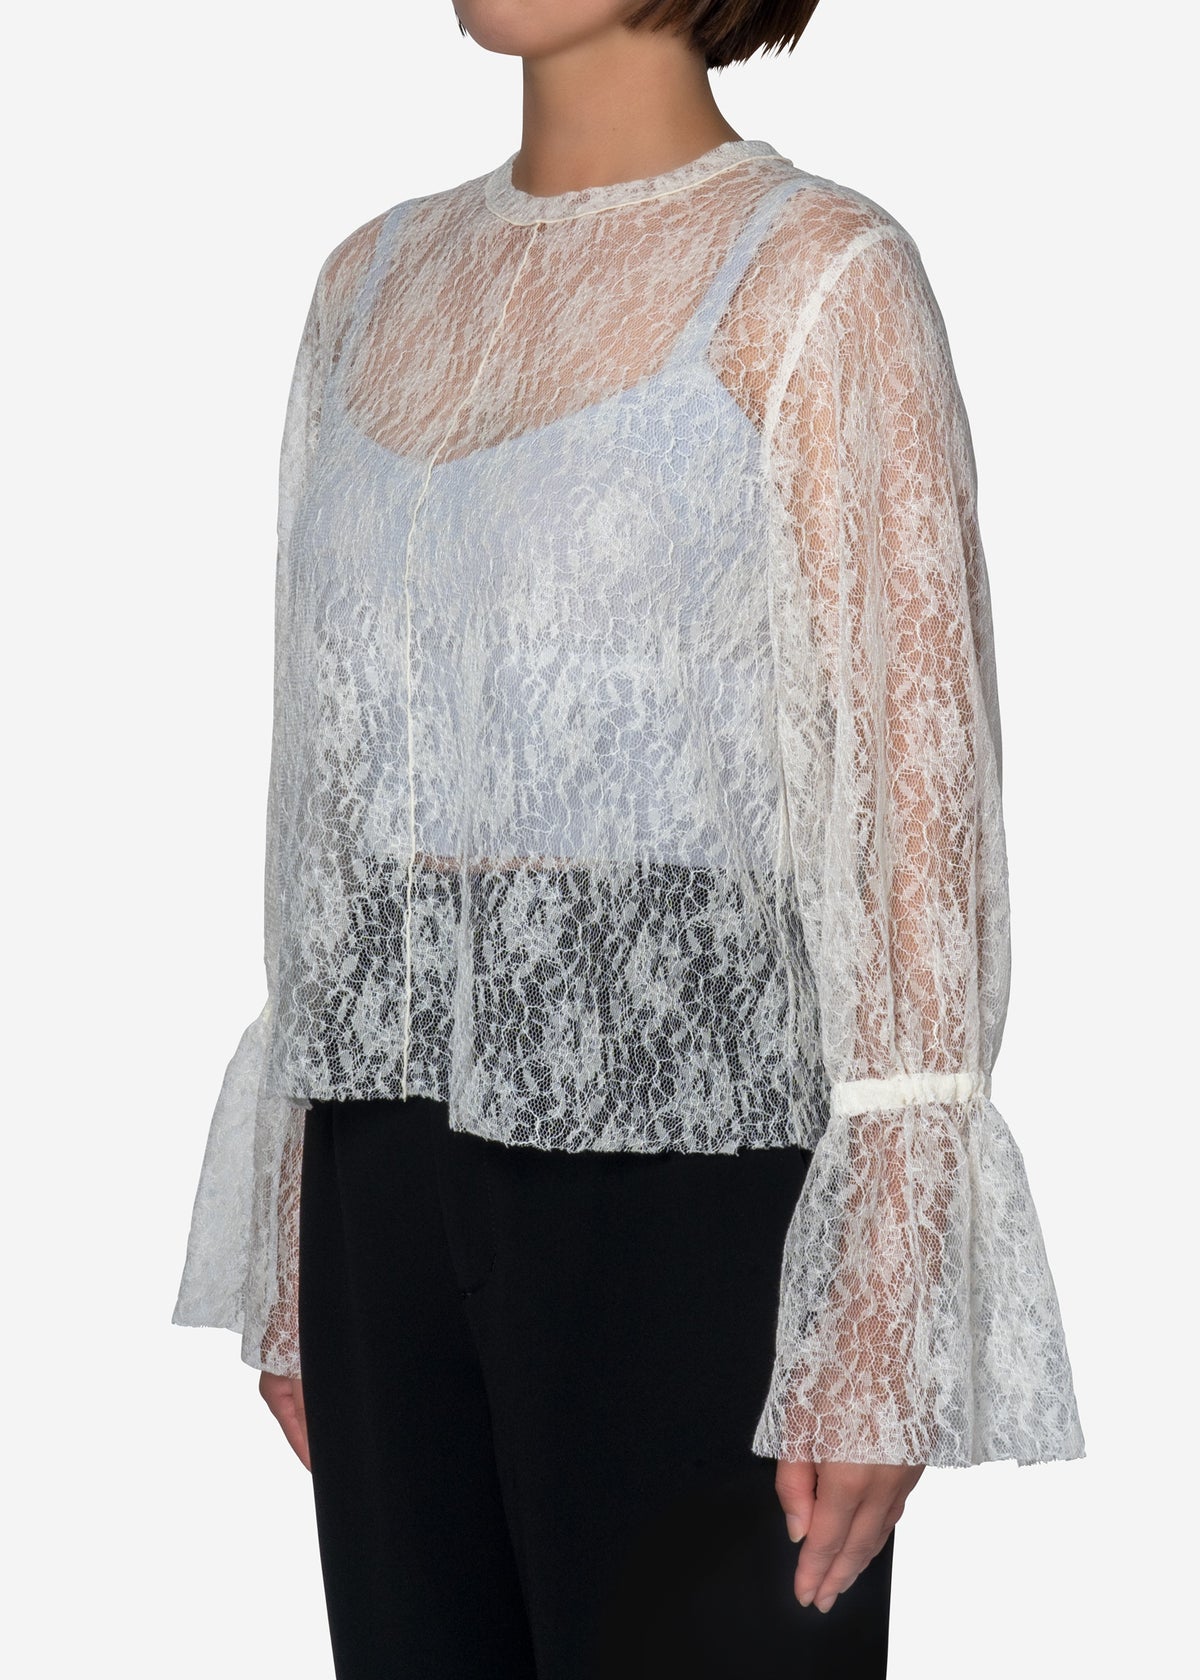 Wool Lace Flare Top in Off White Greed International を買い物し